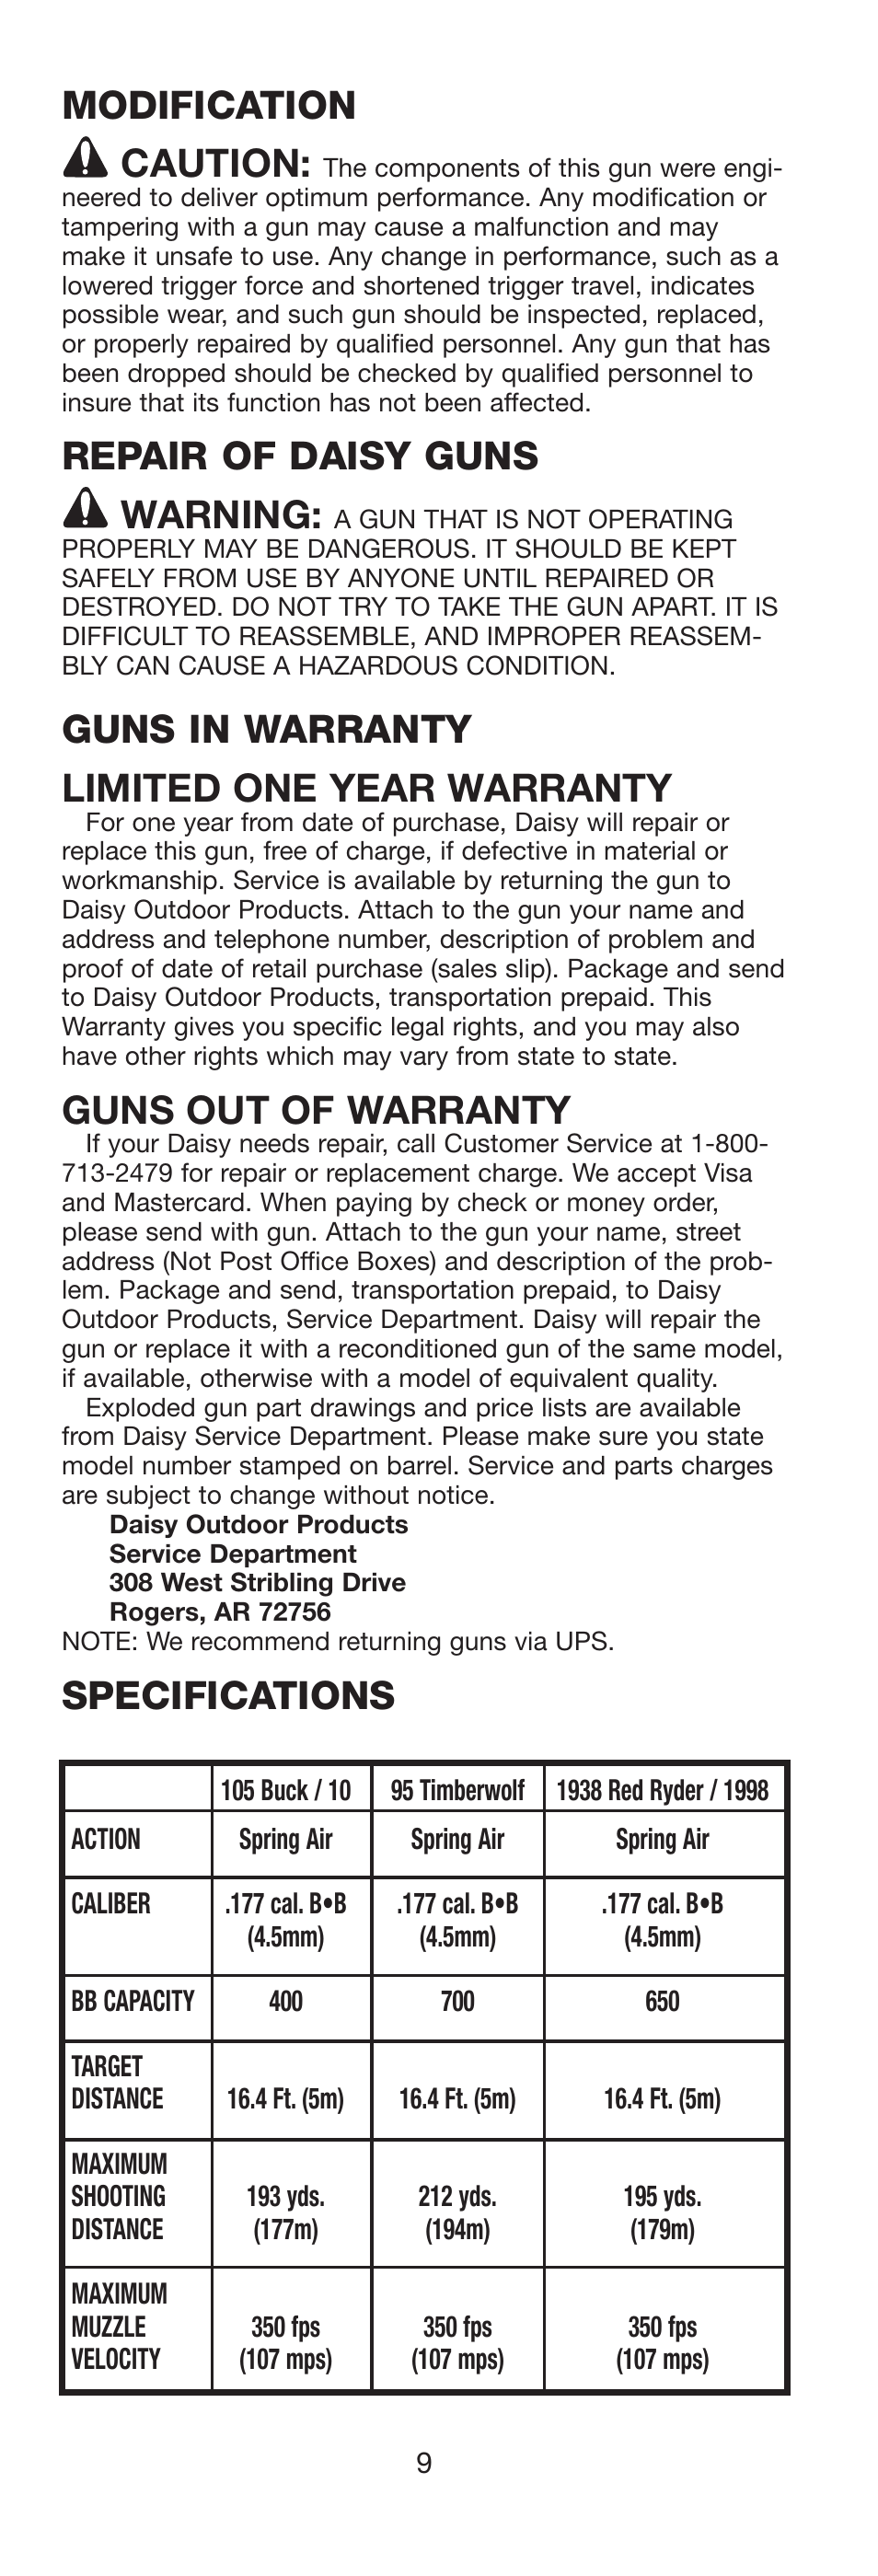 Modification caution, Repair of daisy guns warning, Guns in warranty limited one year warranty | Guns out of warranty, Specifications | Daisy 105 Buck User Manual | Page 10 / 36